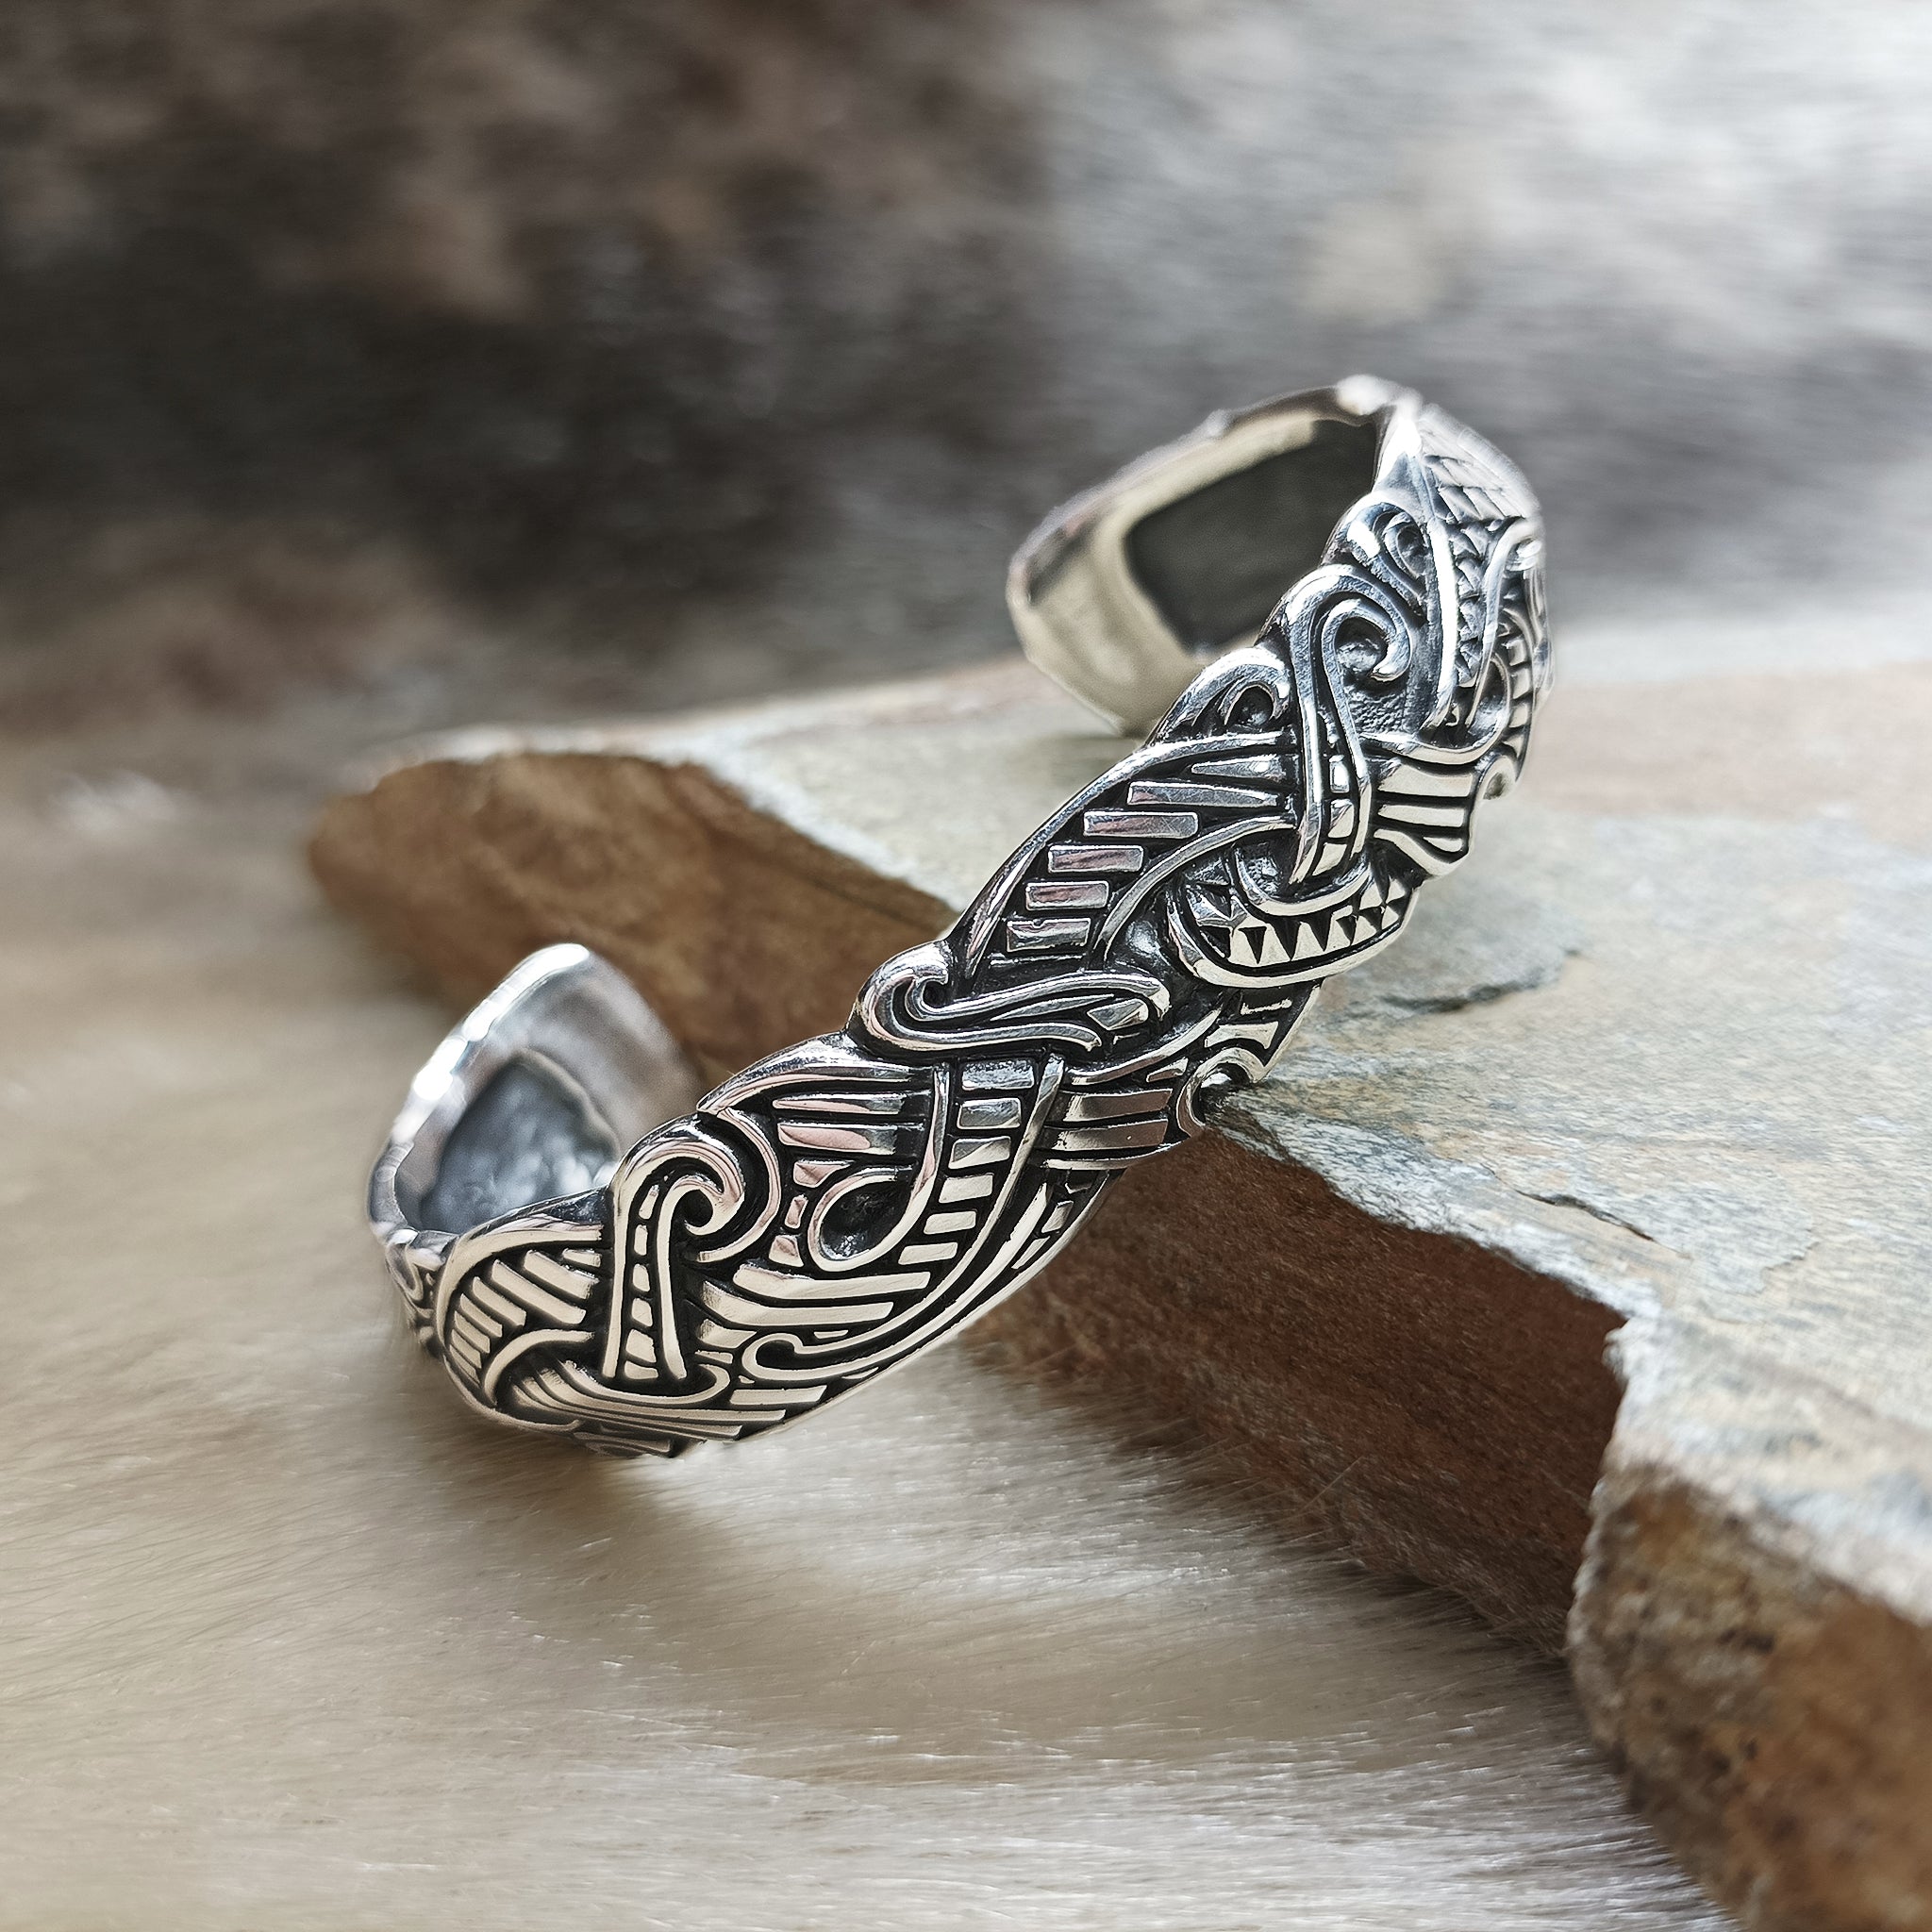 Silver Viking Raven Arm Ring on Rock - Angle View